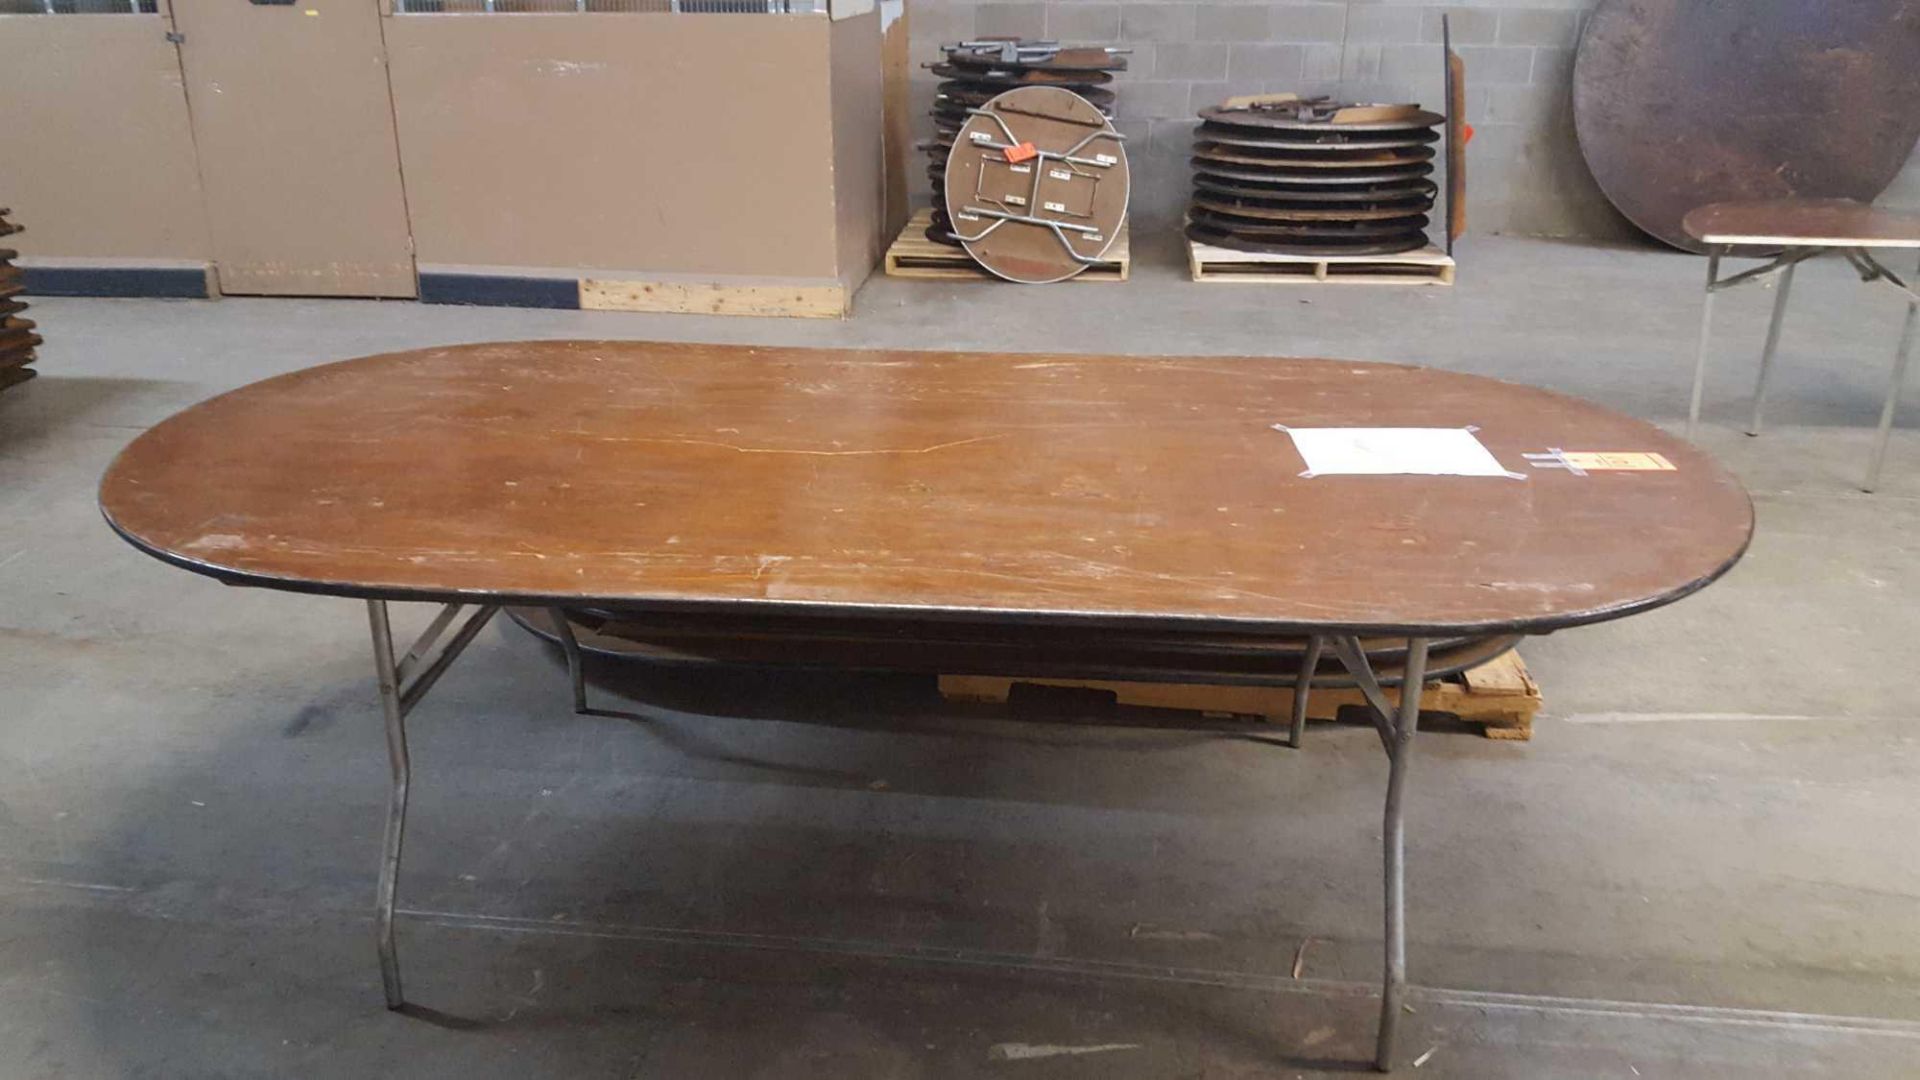 Lot of (6) Palmer racetrack tables, oval 84 inch by 48 inch by 30 in, with folding legs. - Bild 2 aus 4